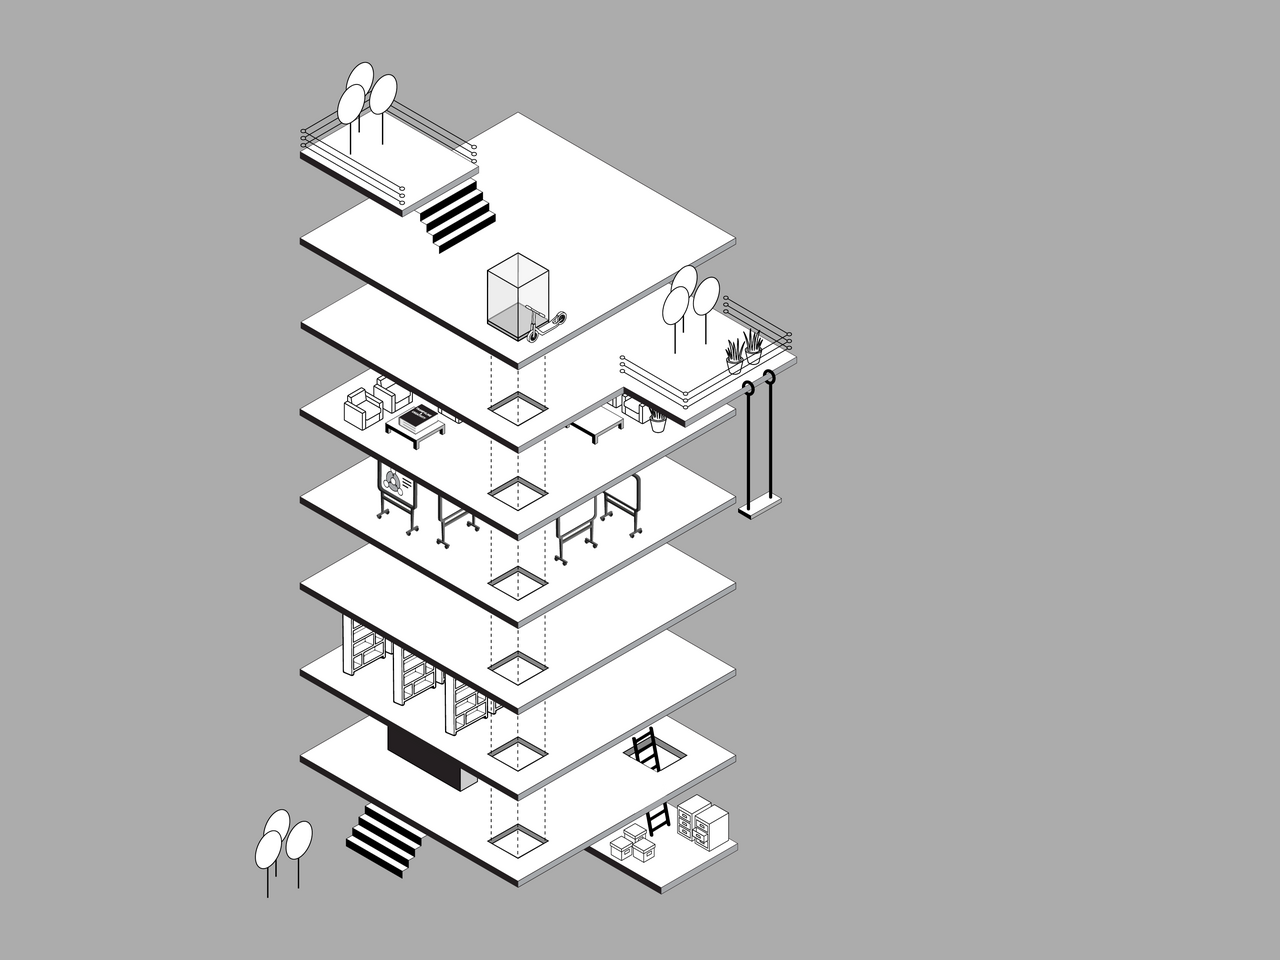 Isometric Building Schema with Furniture